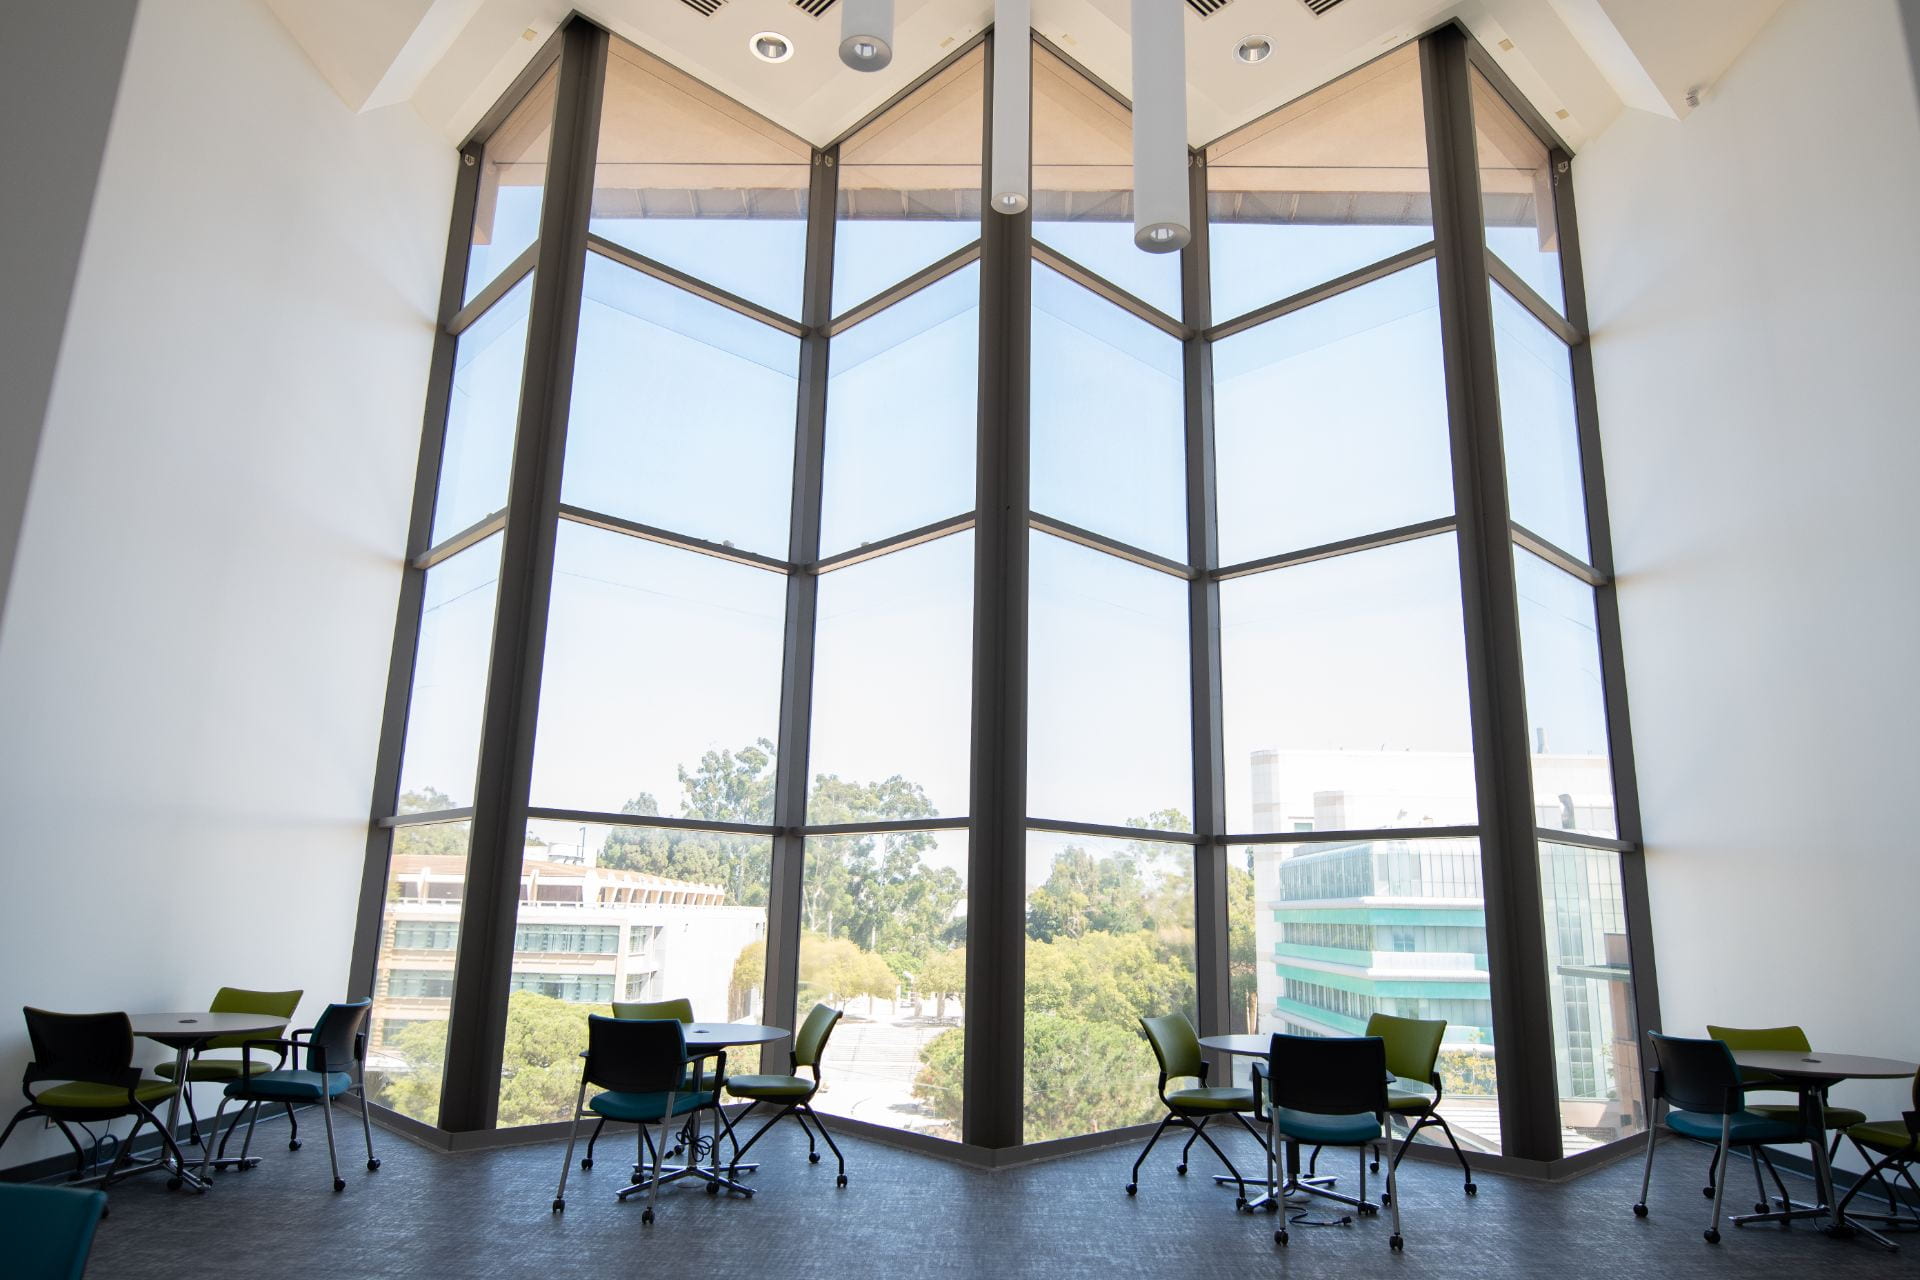 Tables facing a large window overlooking UCI campus